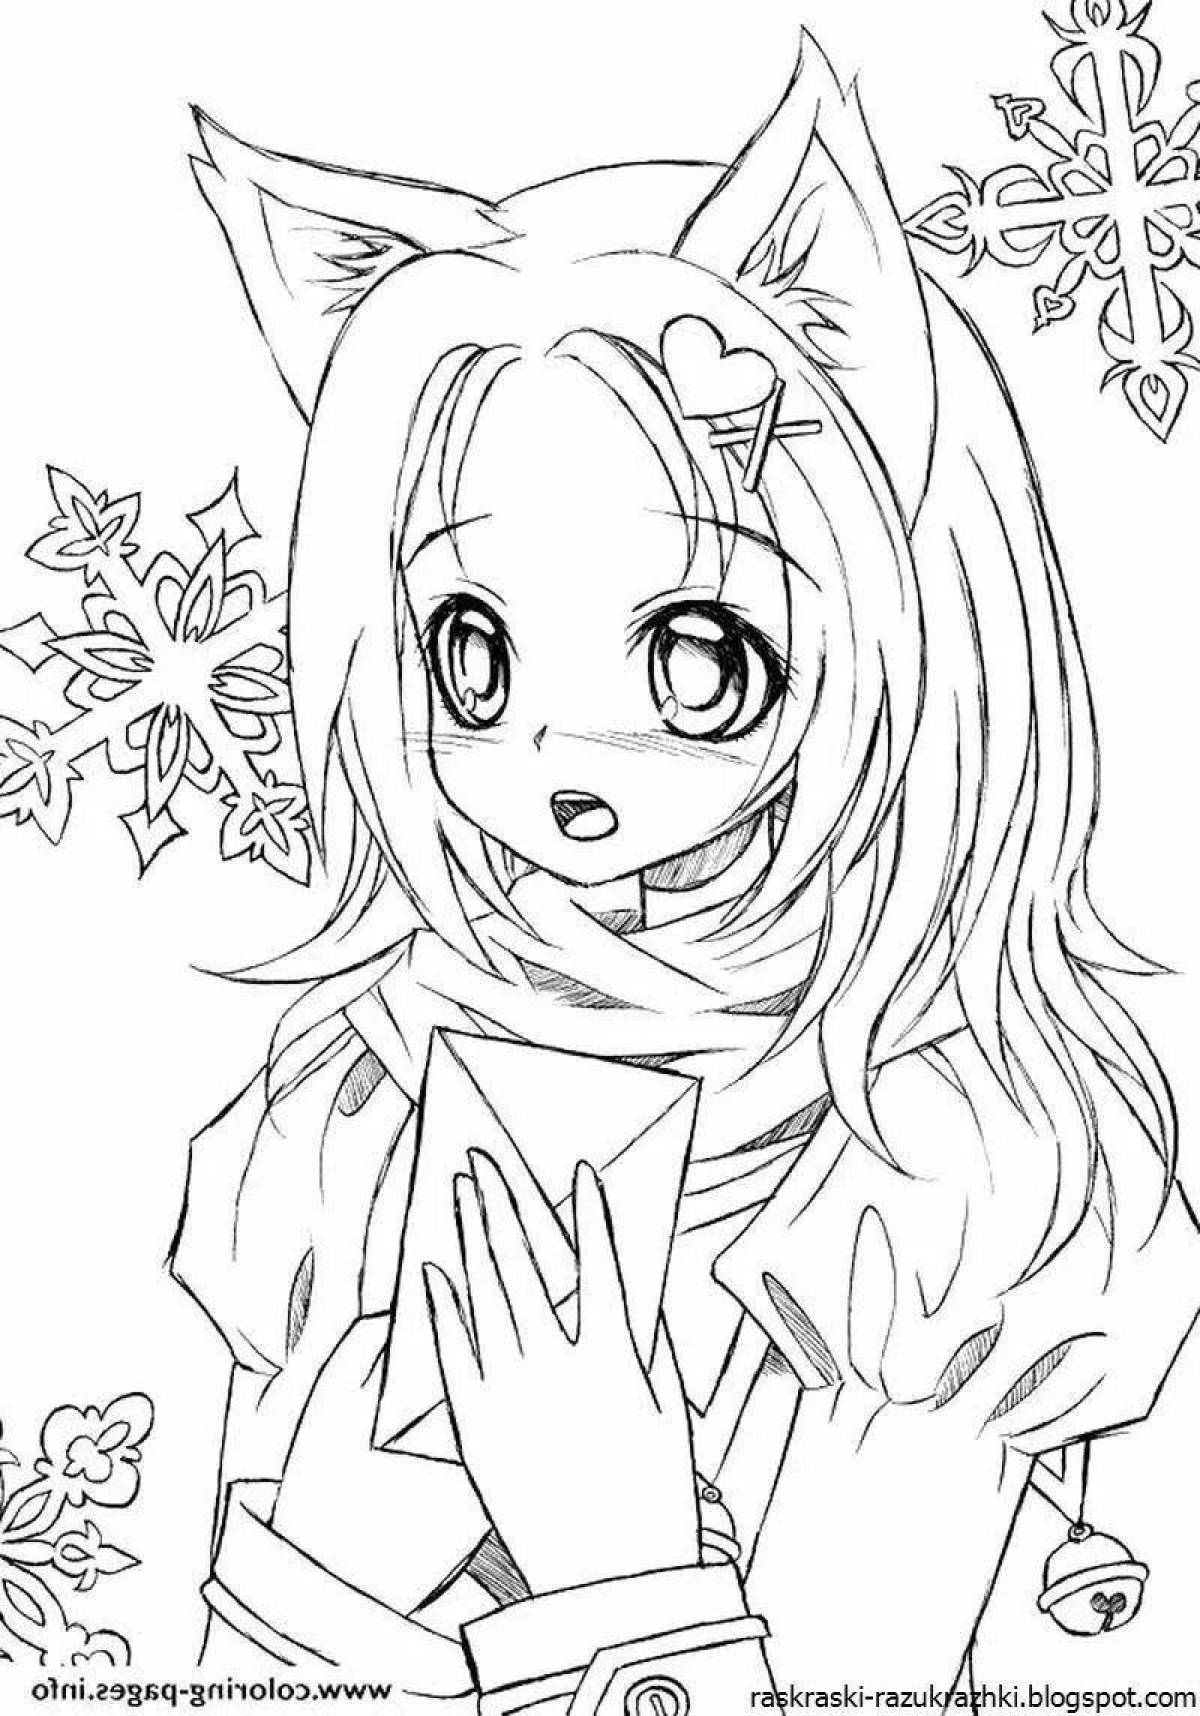 Coloring pages for girls 11 years old, cute